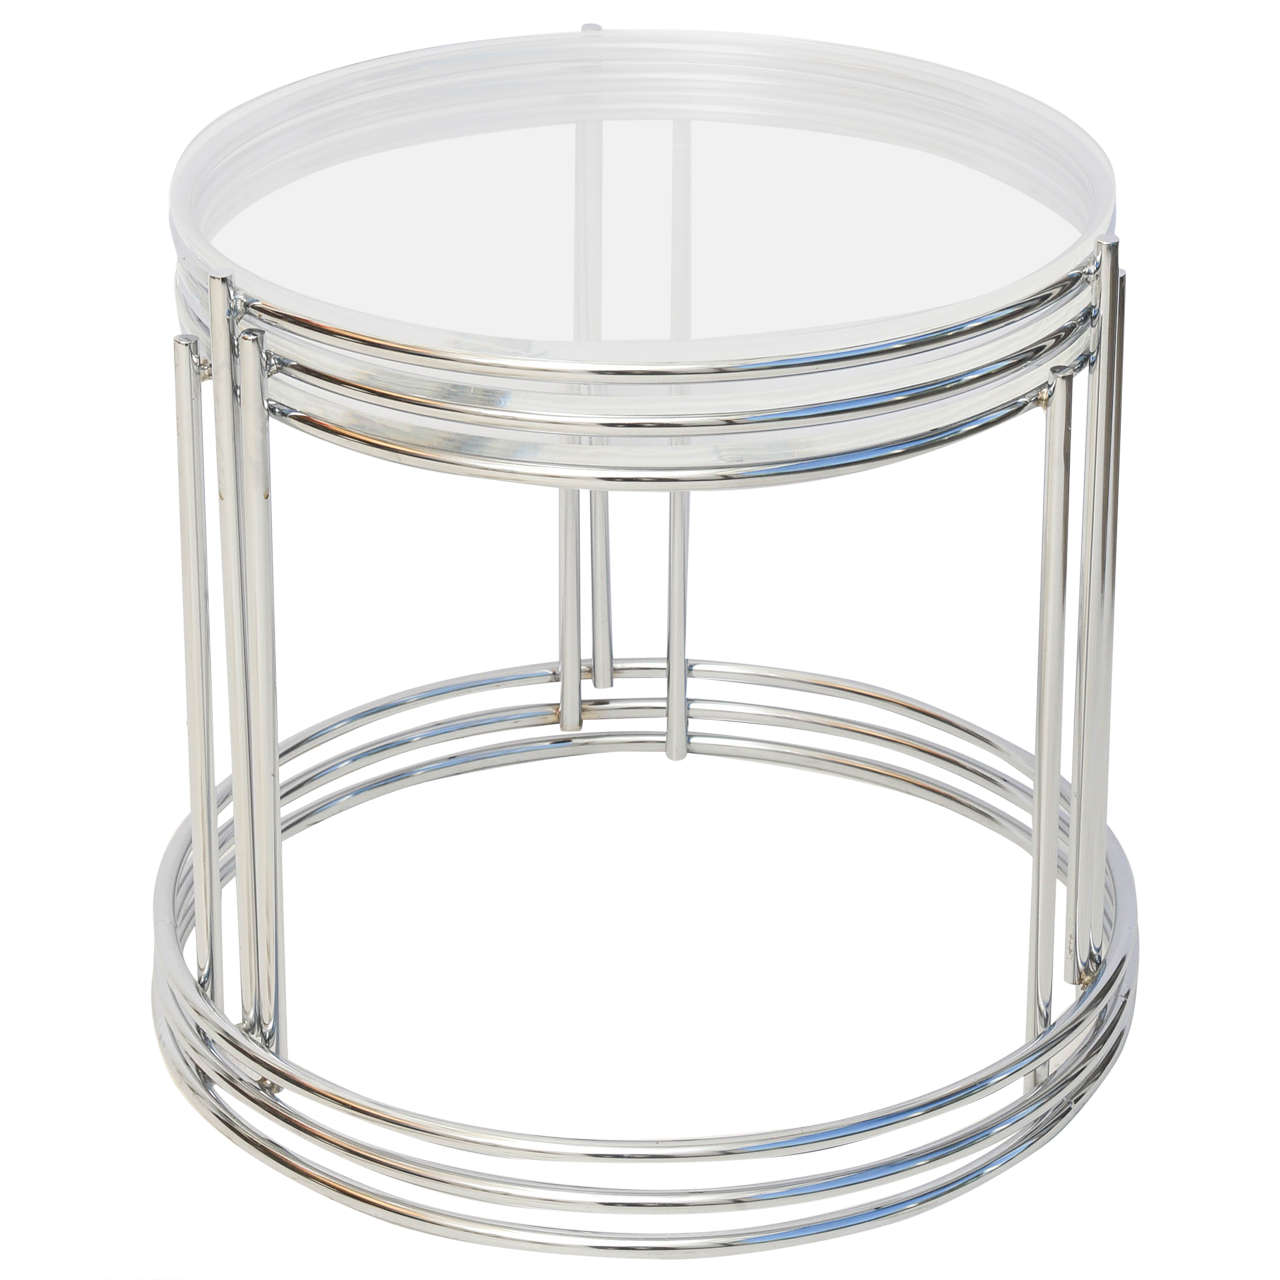 This set of three polished chrome and lucite nesting tables are very much in the style of Saporiti, Italia and date the the 1970s.

The three tables can be arranged when stacked to have variations on how the rods align or don't (see images).

Note: 